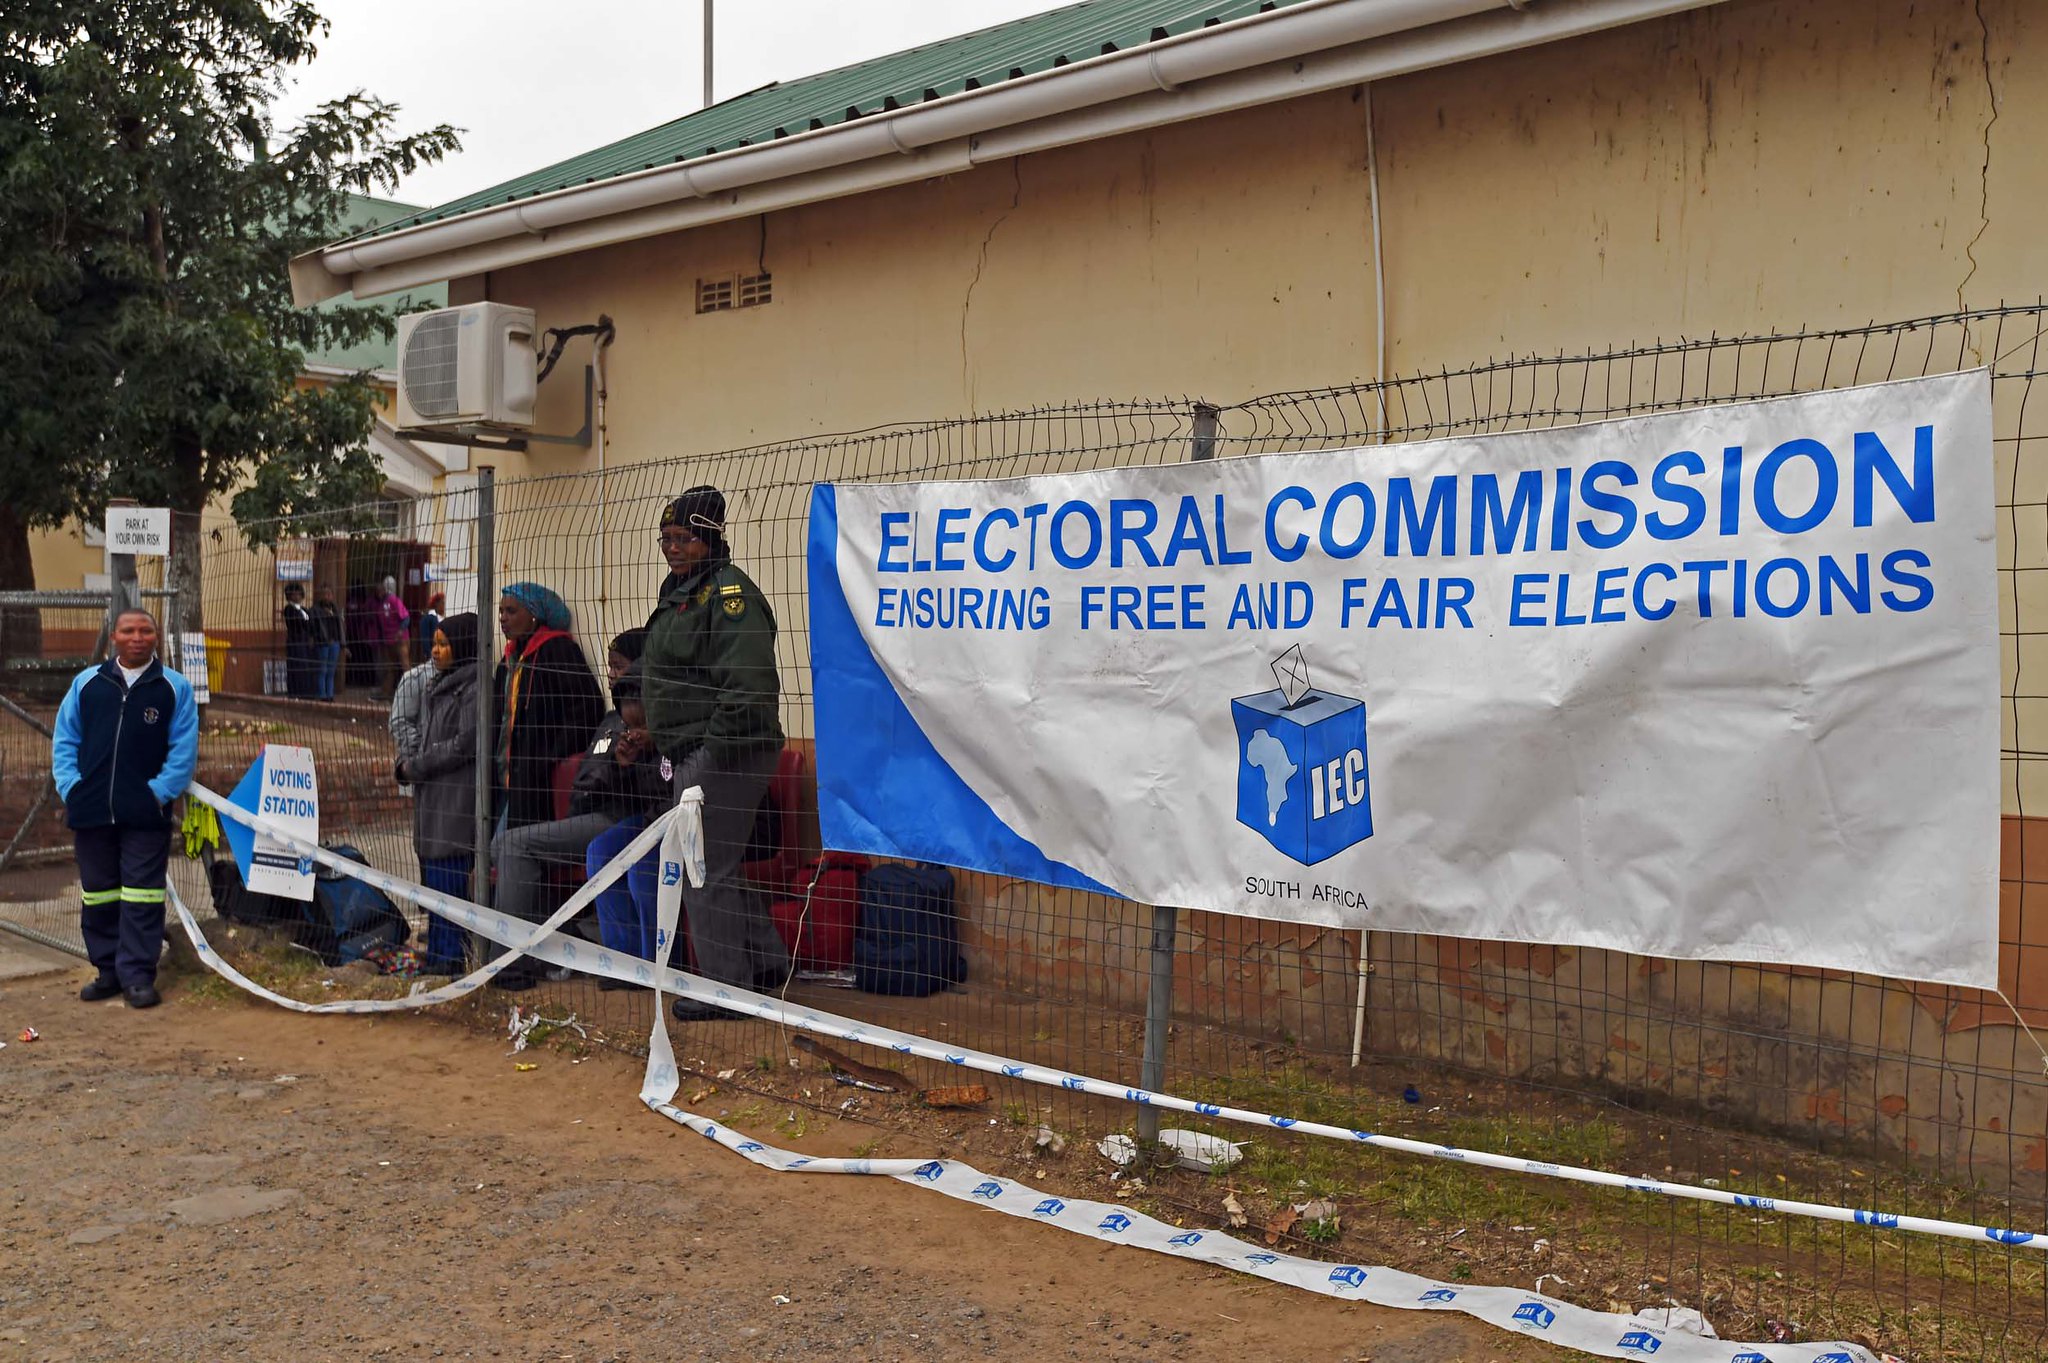 Africa Needs to Keep Making Democracy Work Through Free and Fair Polls